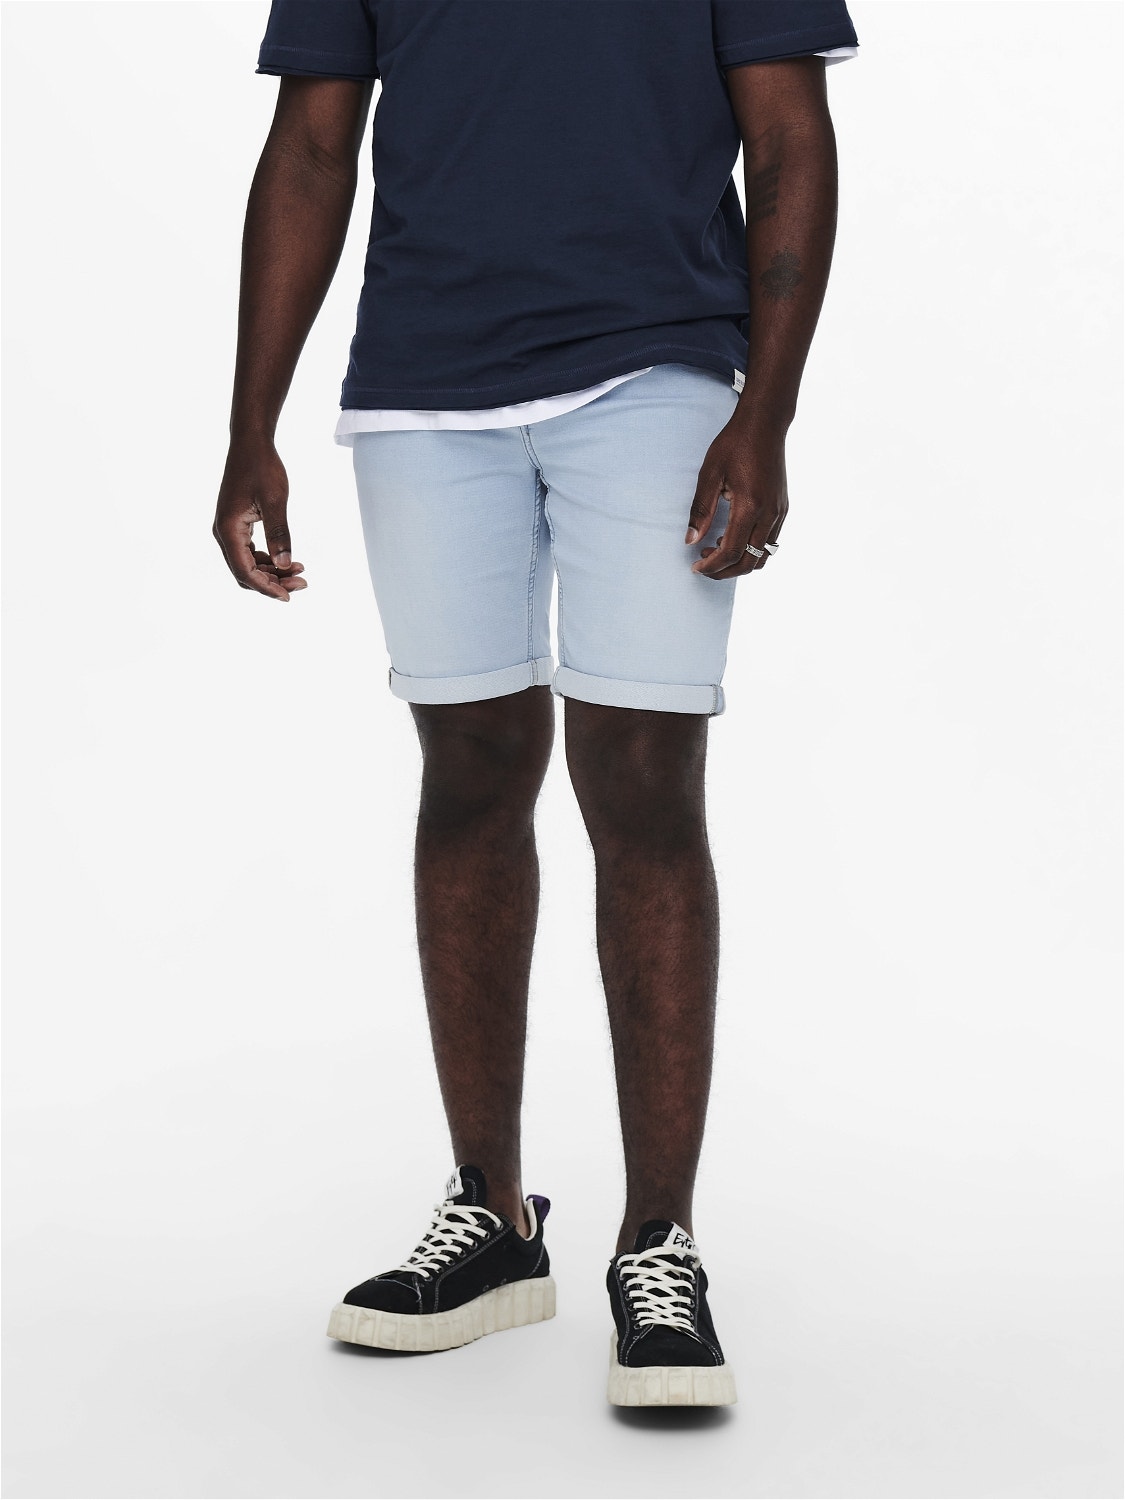 ONLY & SONS Shorts Regular Fit Taille moyenne -Blue Denim - 22018587